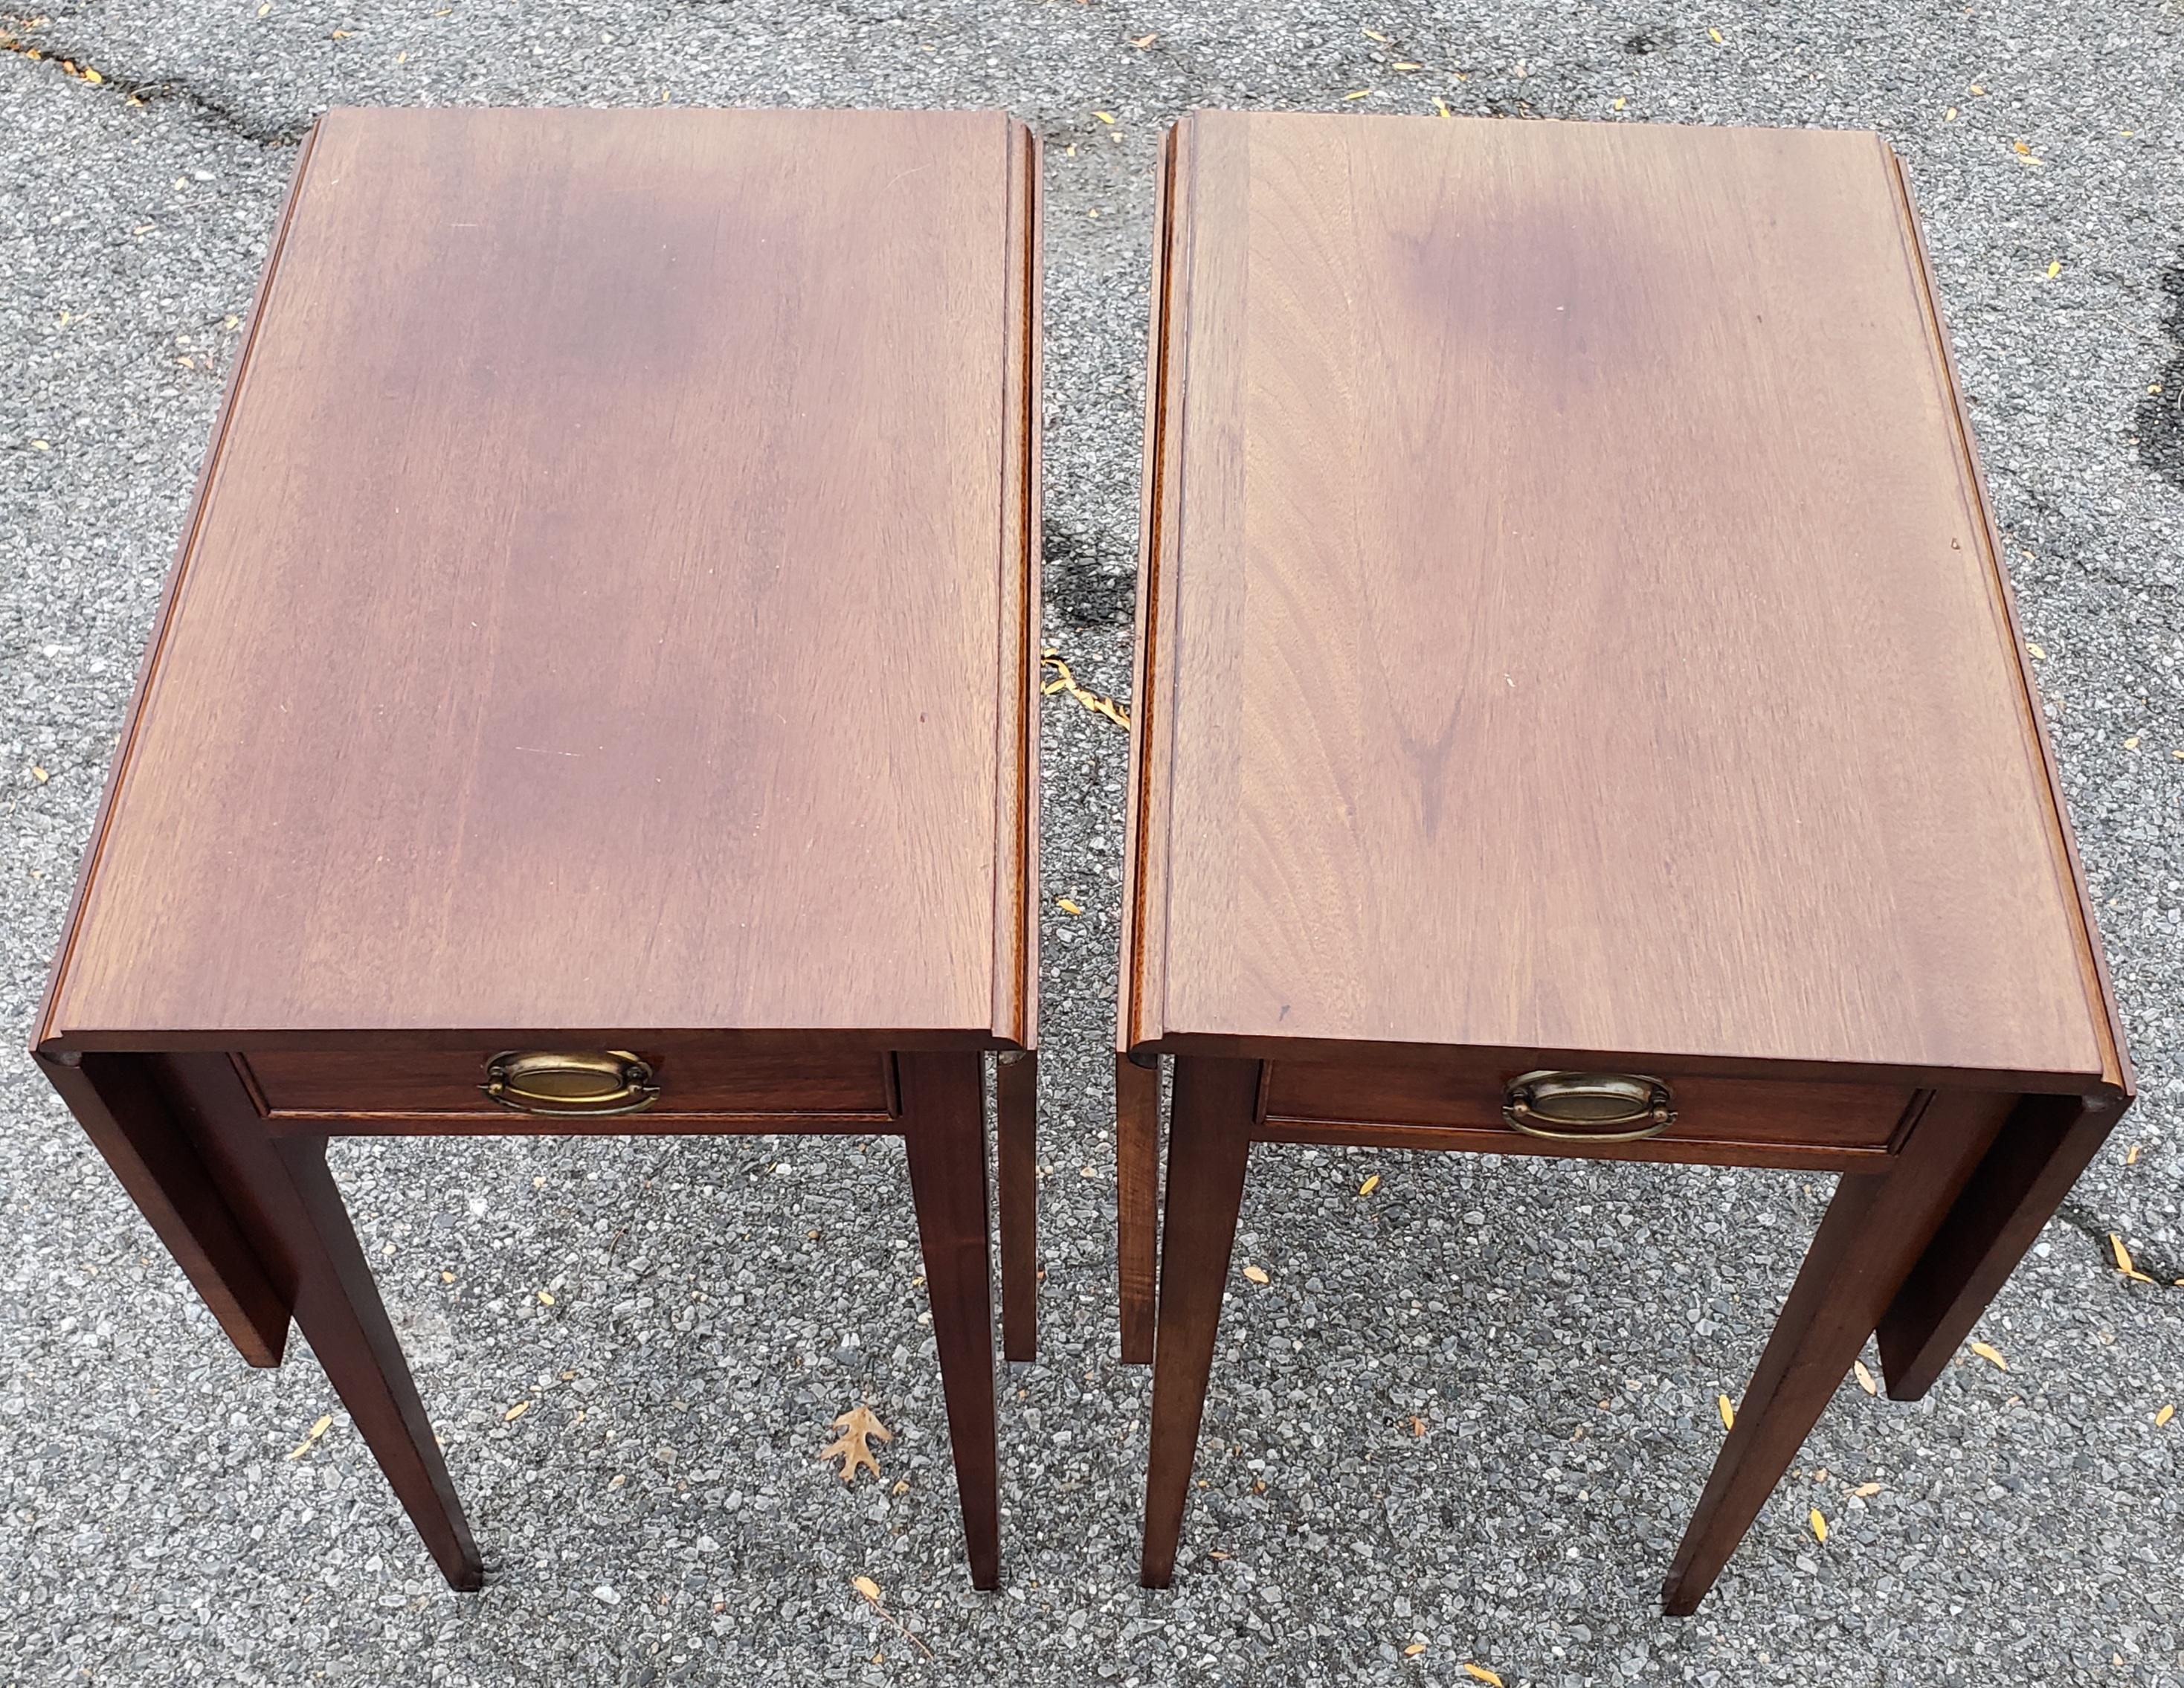 Matched pair of heirloom quality Pinckney Pembroke side tables by the Craftique Furniture Company of Mebane, North Carolina.Craftique was in existence from 1946-2012 and throughout was recognized as the nation's leading maker of heirloom quality